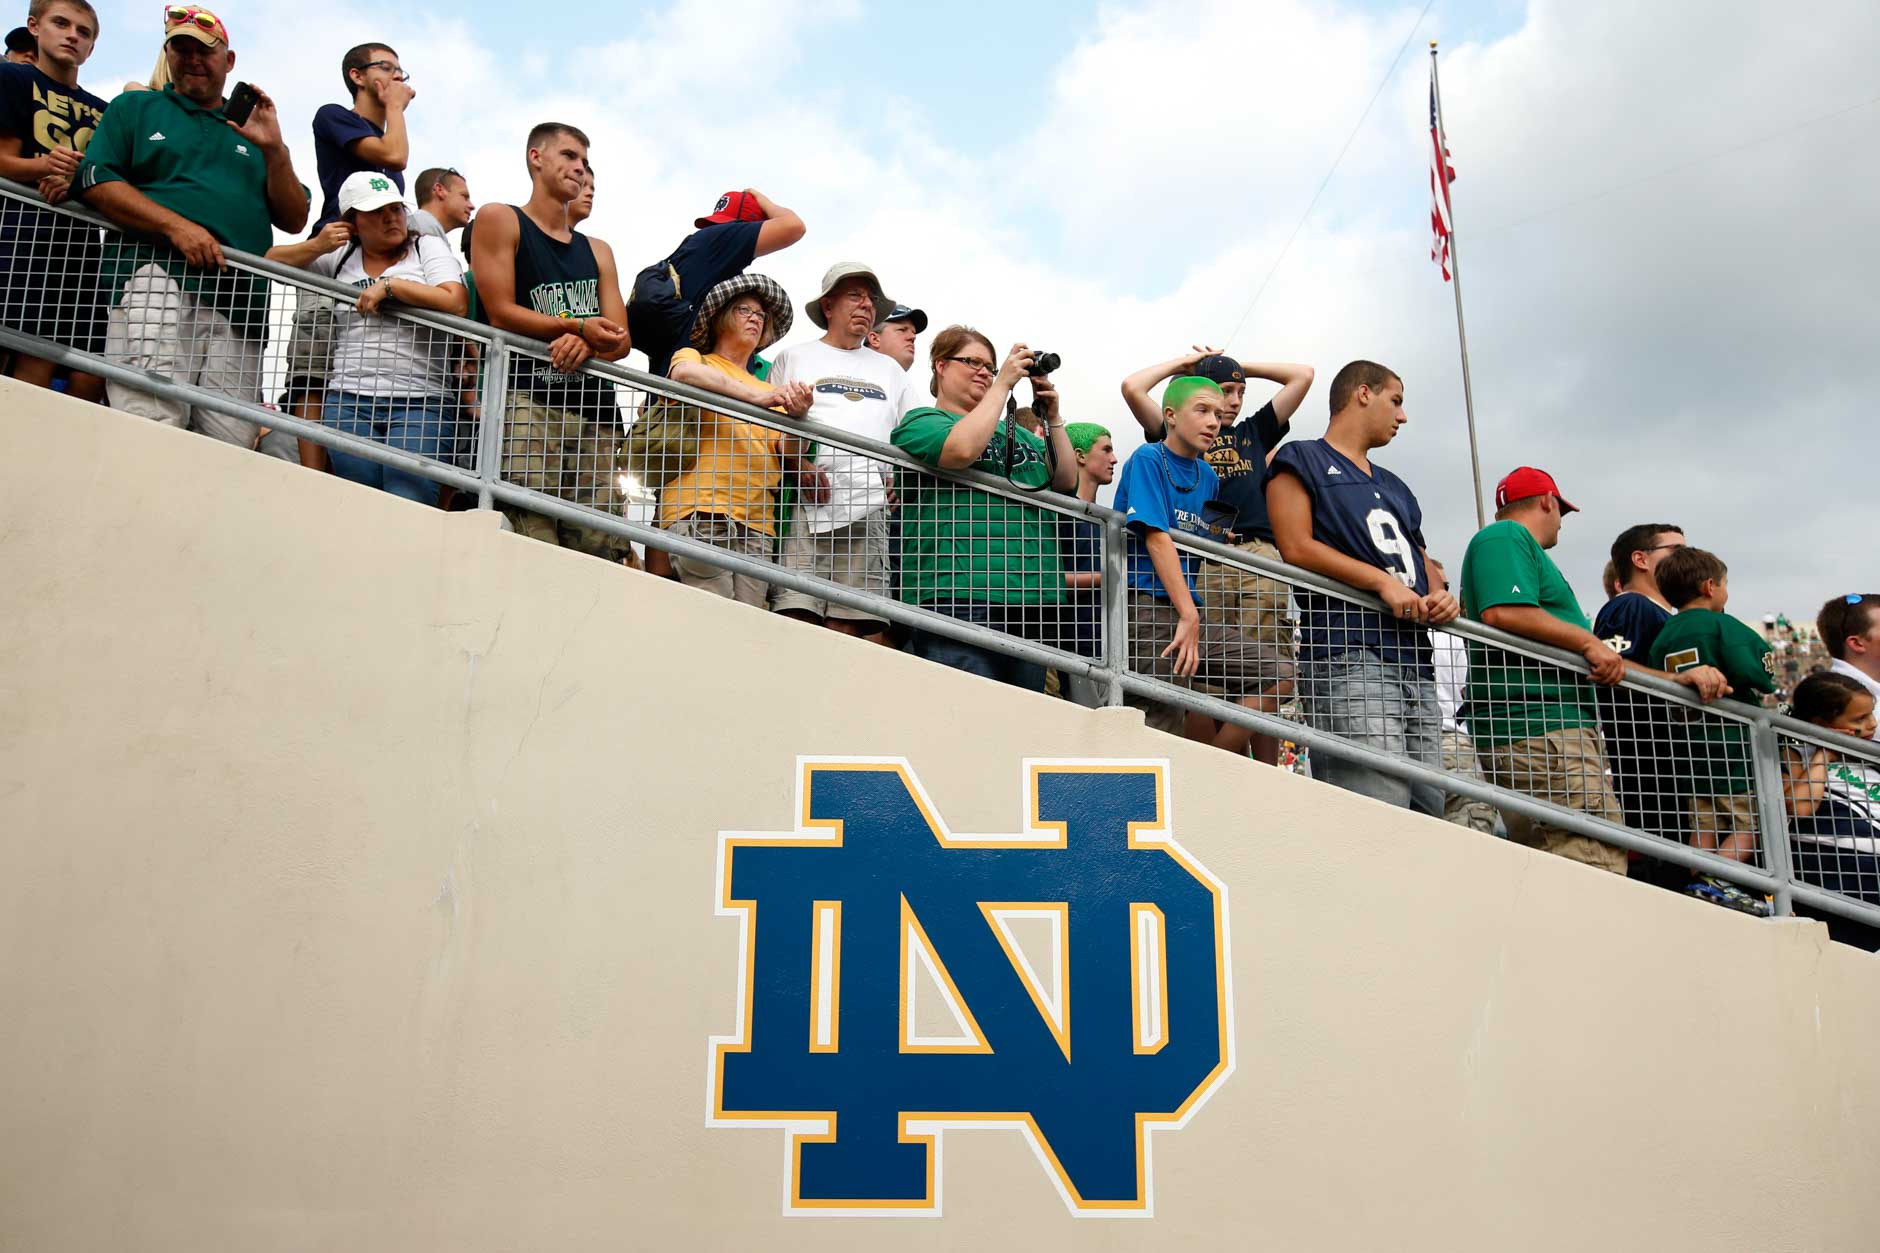 Notre Dame Temple Football